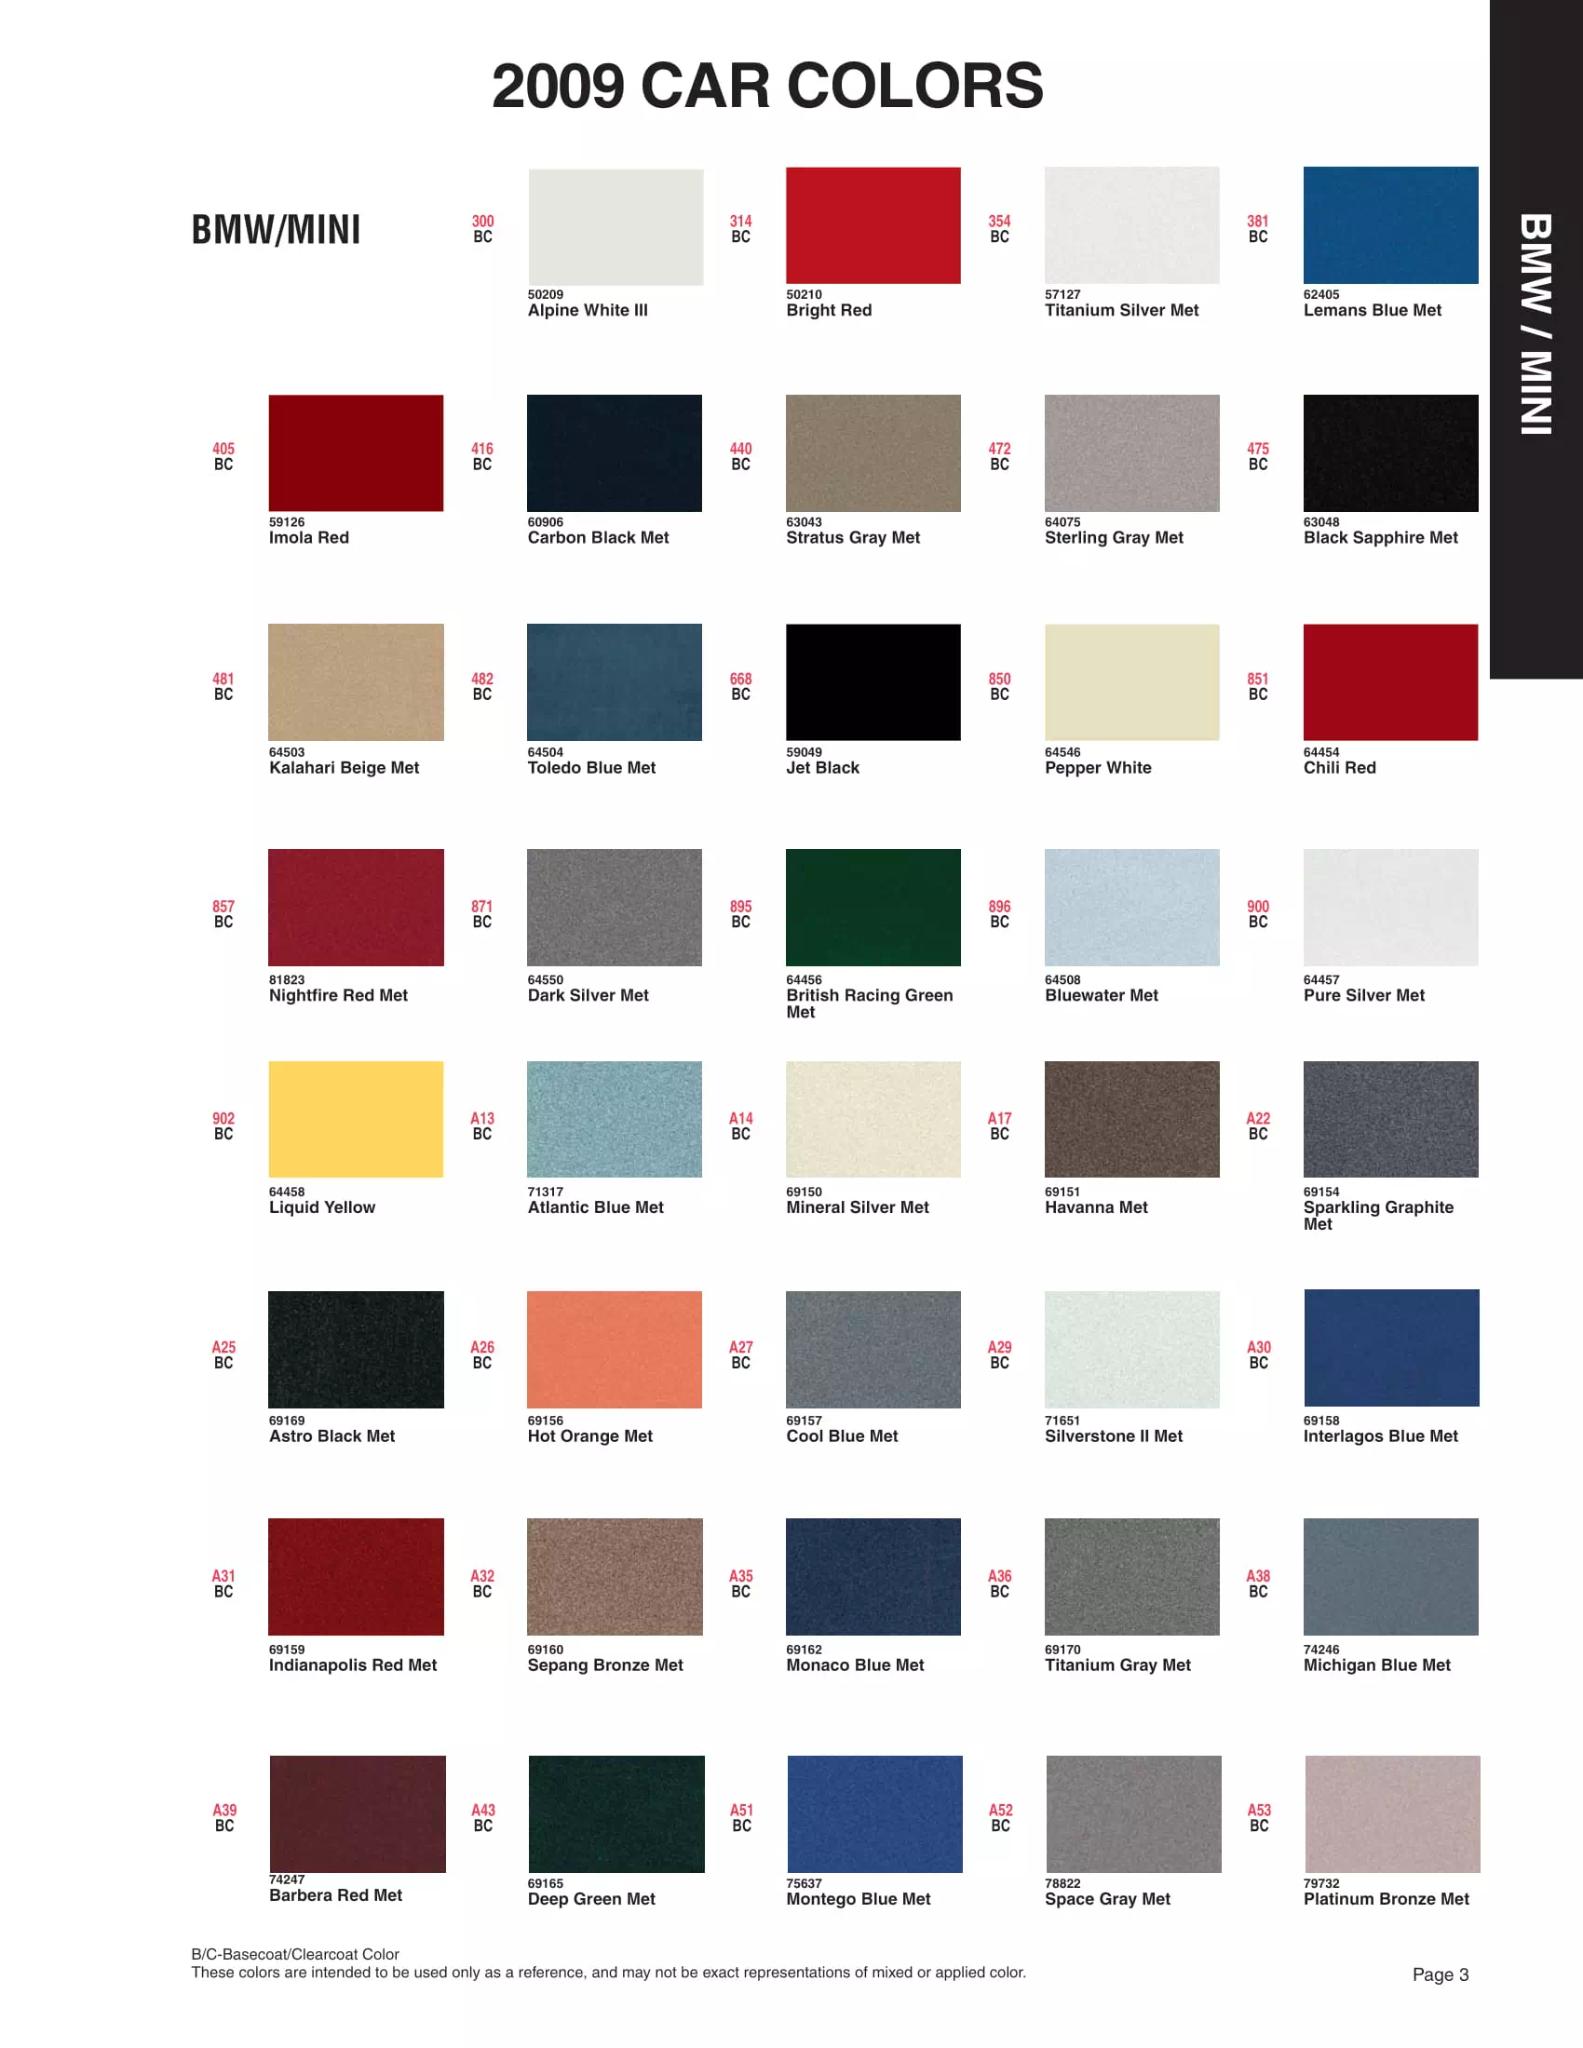 Paint codes and color charts used on 2009 Vehicles